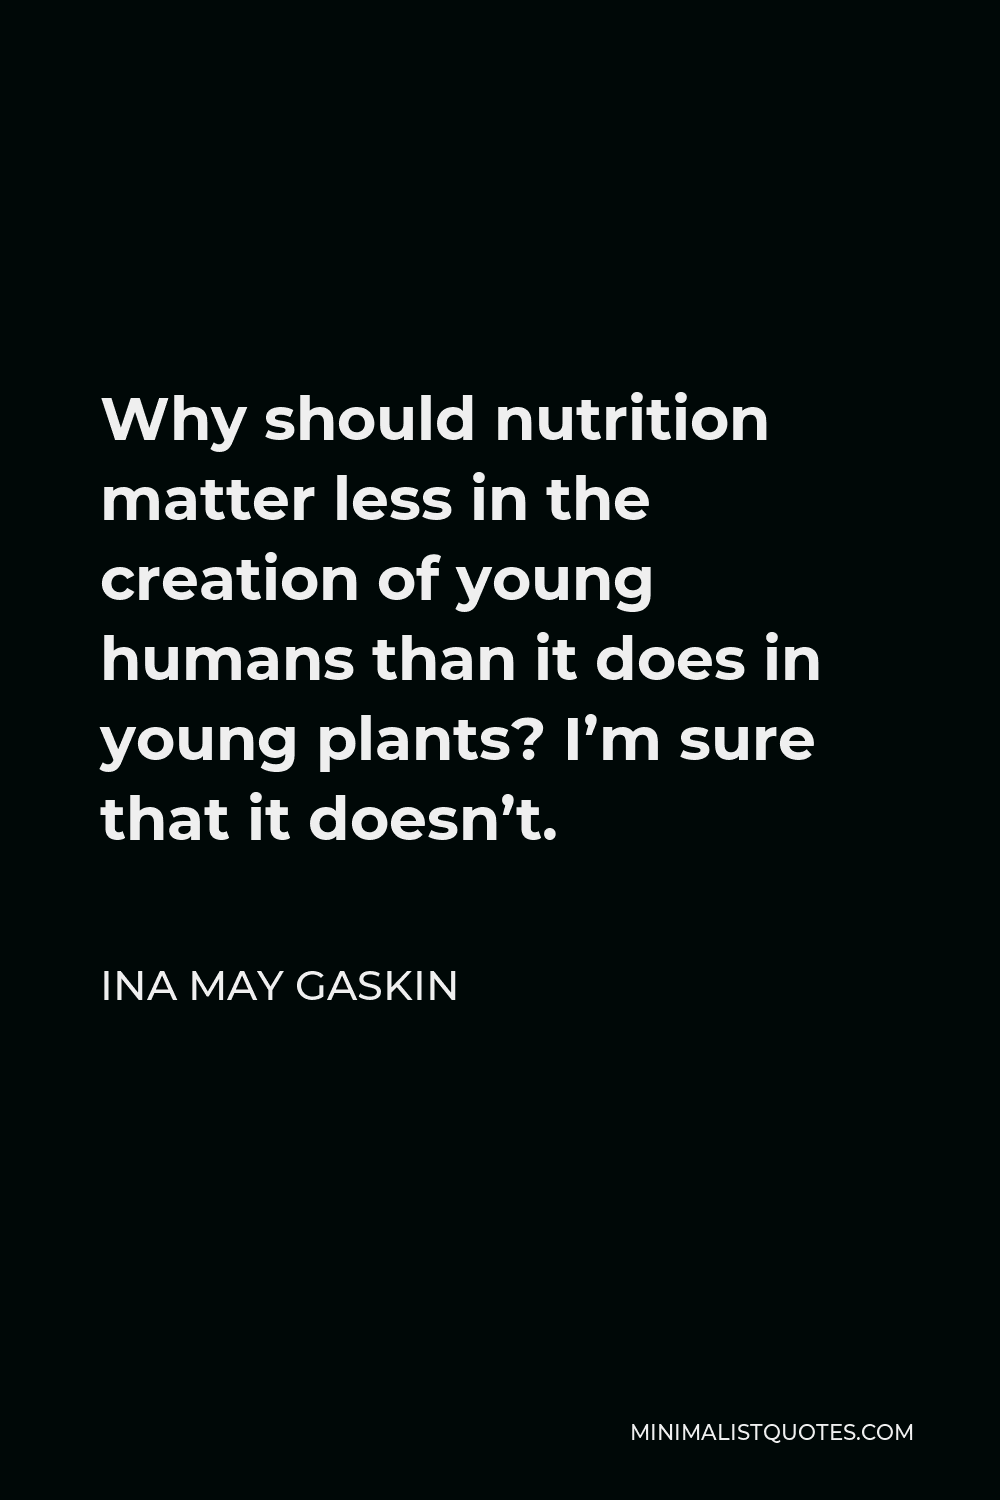 Ina May Gaskin Quote - Why should nutrition matter less in the creation of young humans than it does in young plants? I’m sure that it doesn’t.